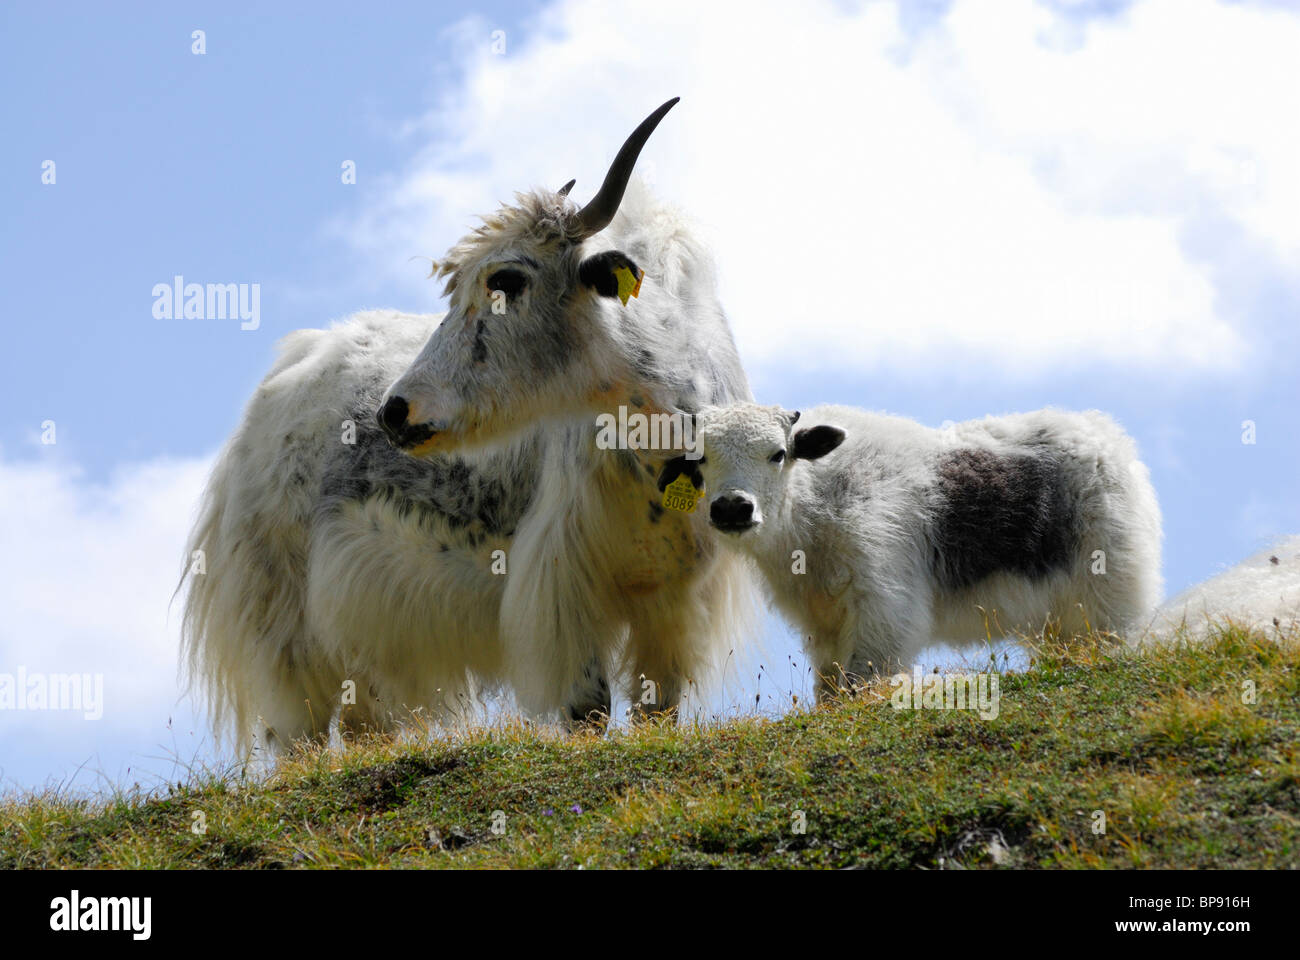 Yak with young animal, Tessin Alps, Canton of Tessin, Switzerland Stock Photo